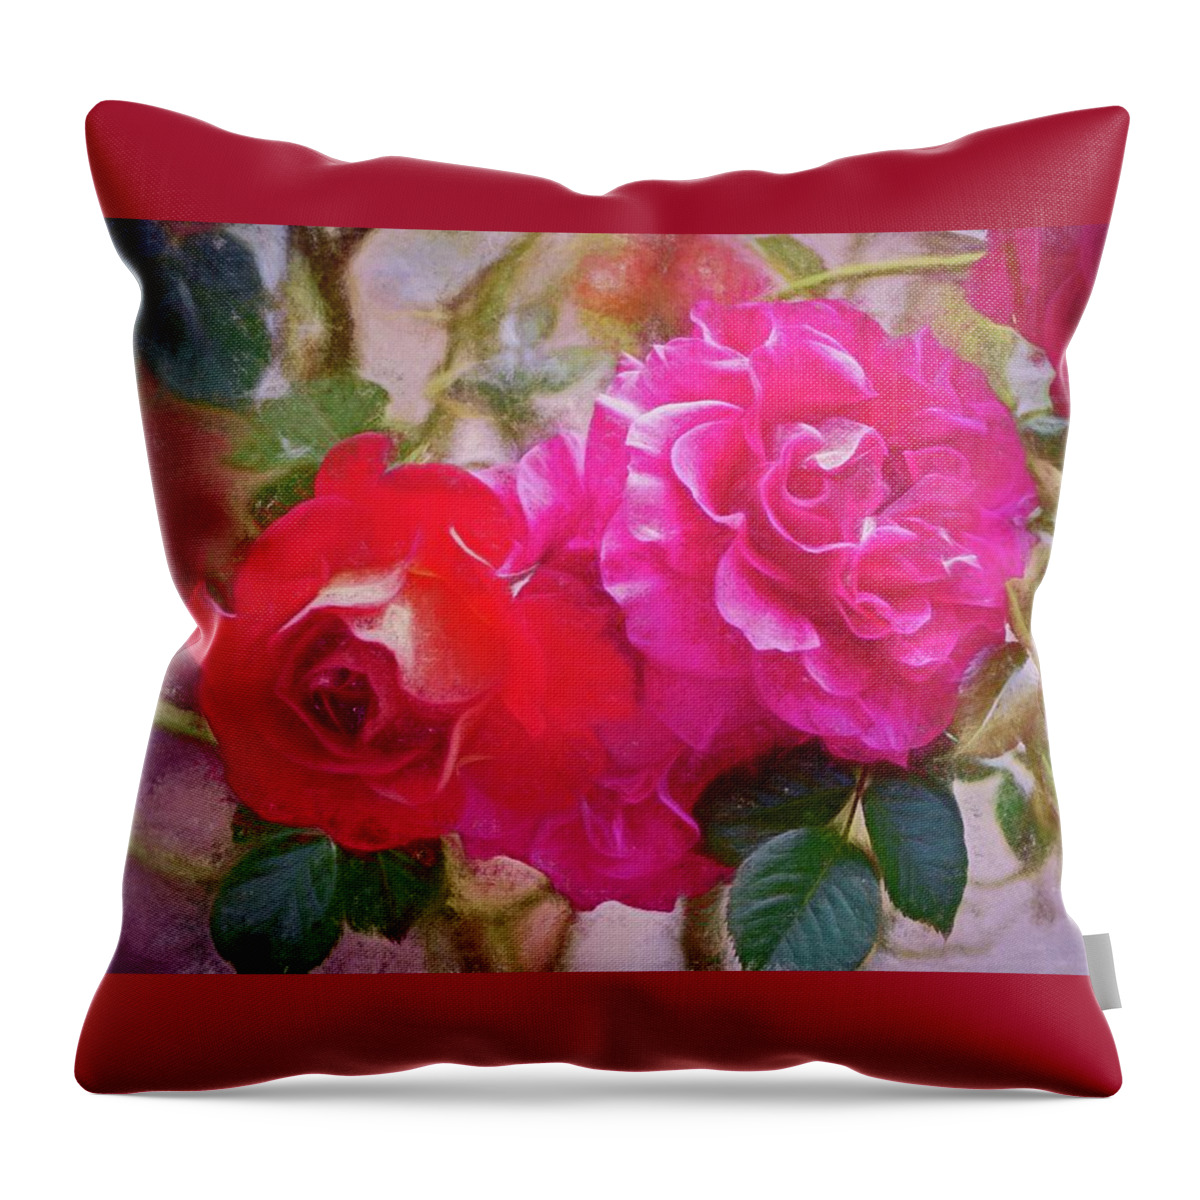 Floral Throw Pillow featuring the photograph Rose 373 by Pamela Cooper